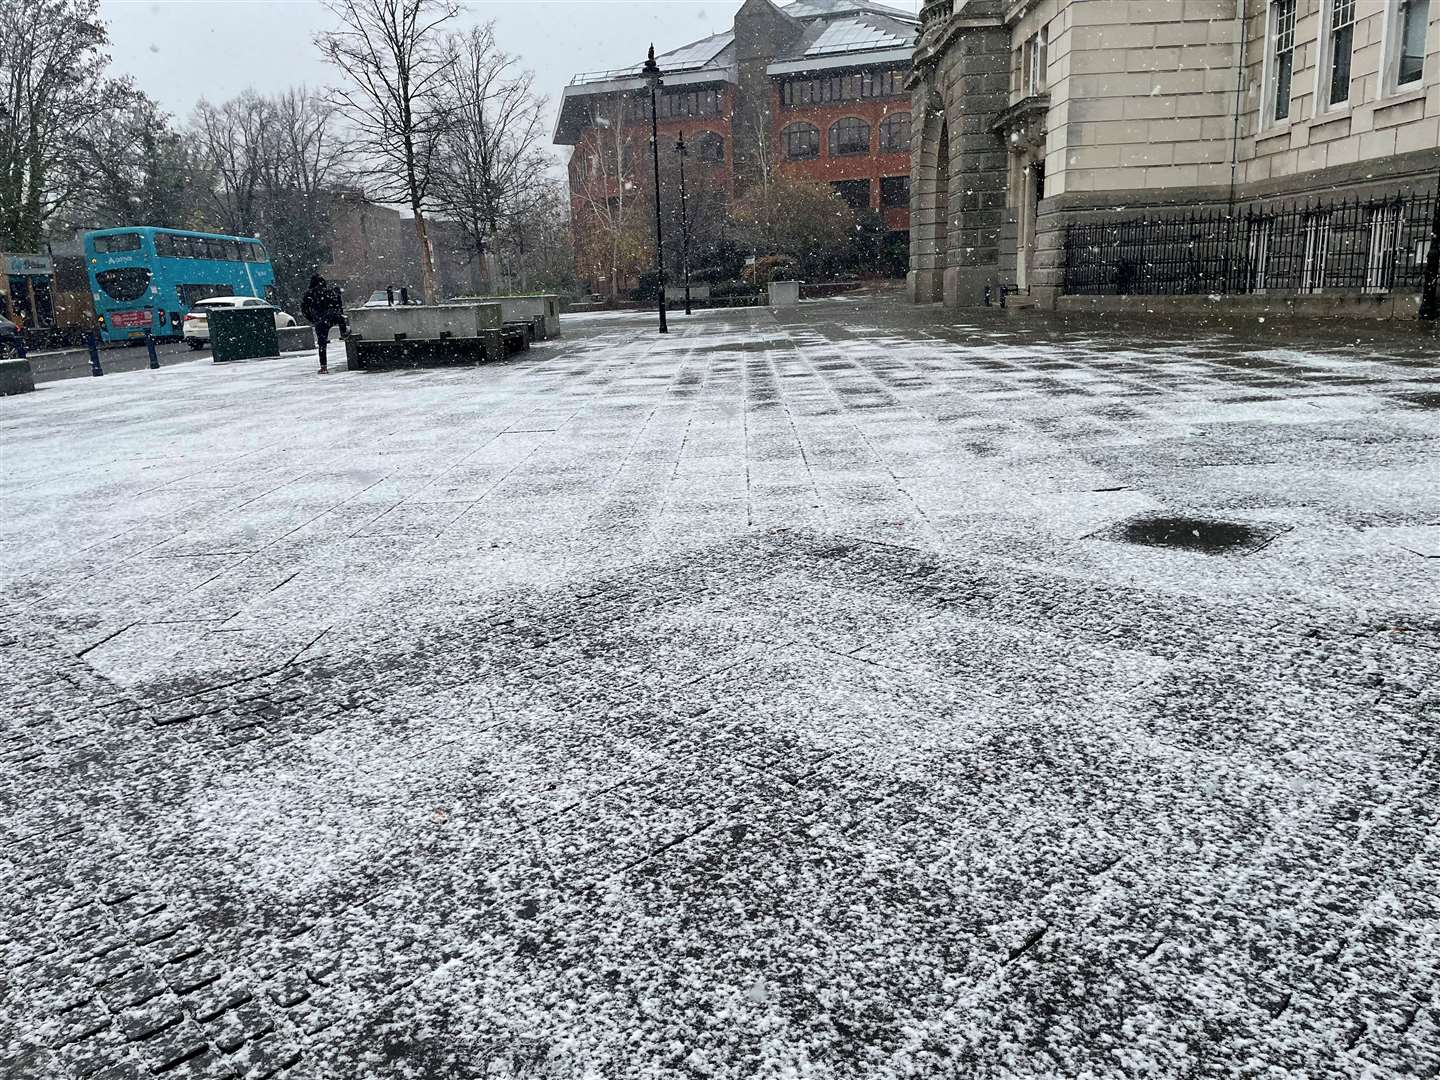 County Hall in Maidstone has been left covered in snow